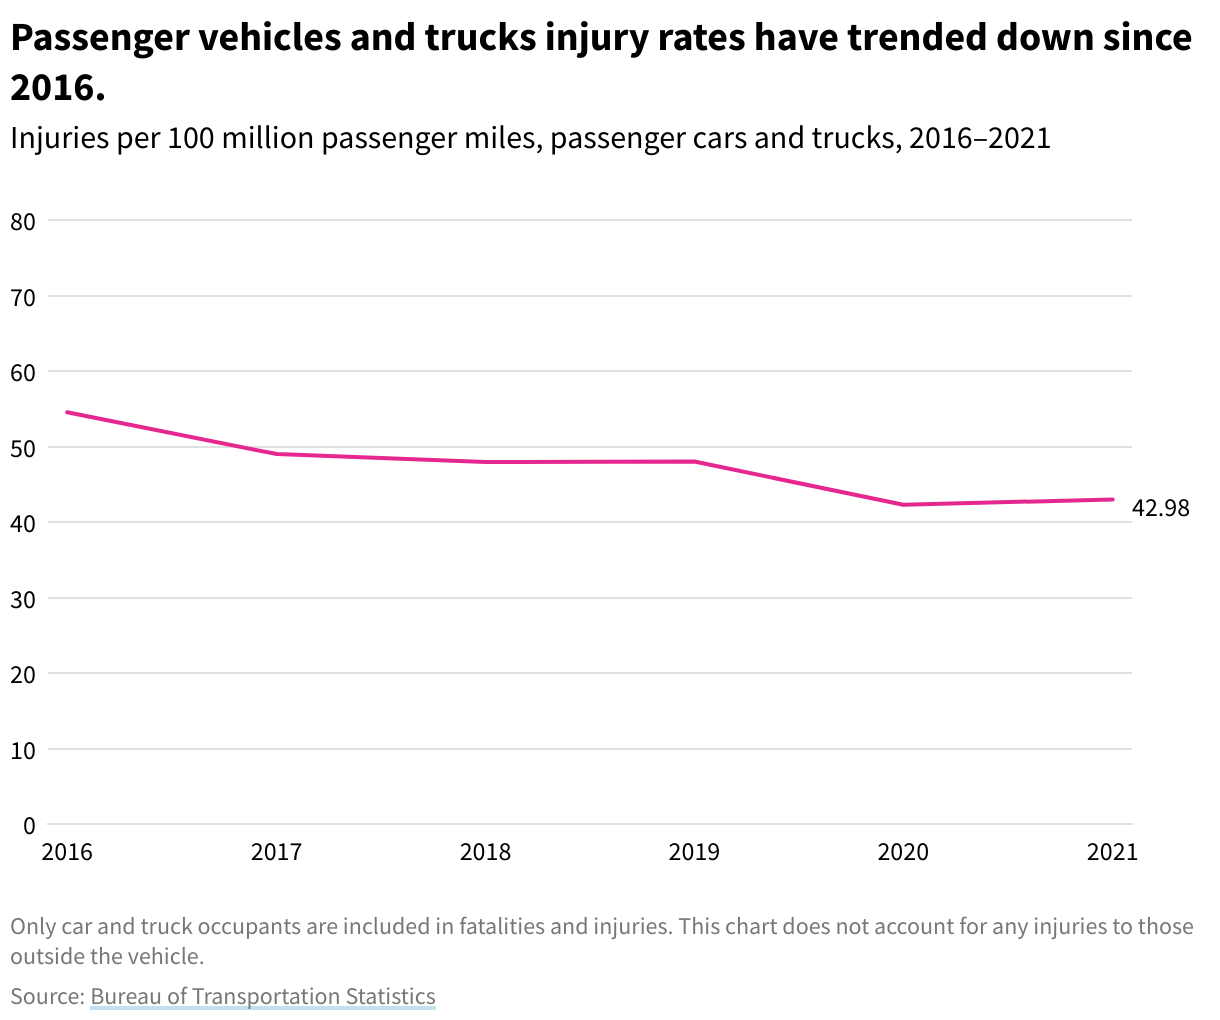 Line chart showing injuries per 100 million passenger miles in passenger cars and trucks from 2016 to 2021 with a general downward trend.